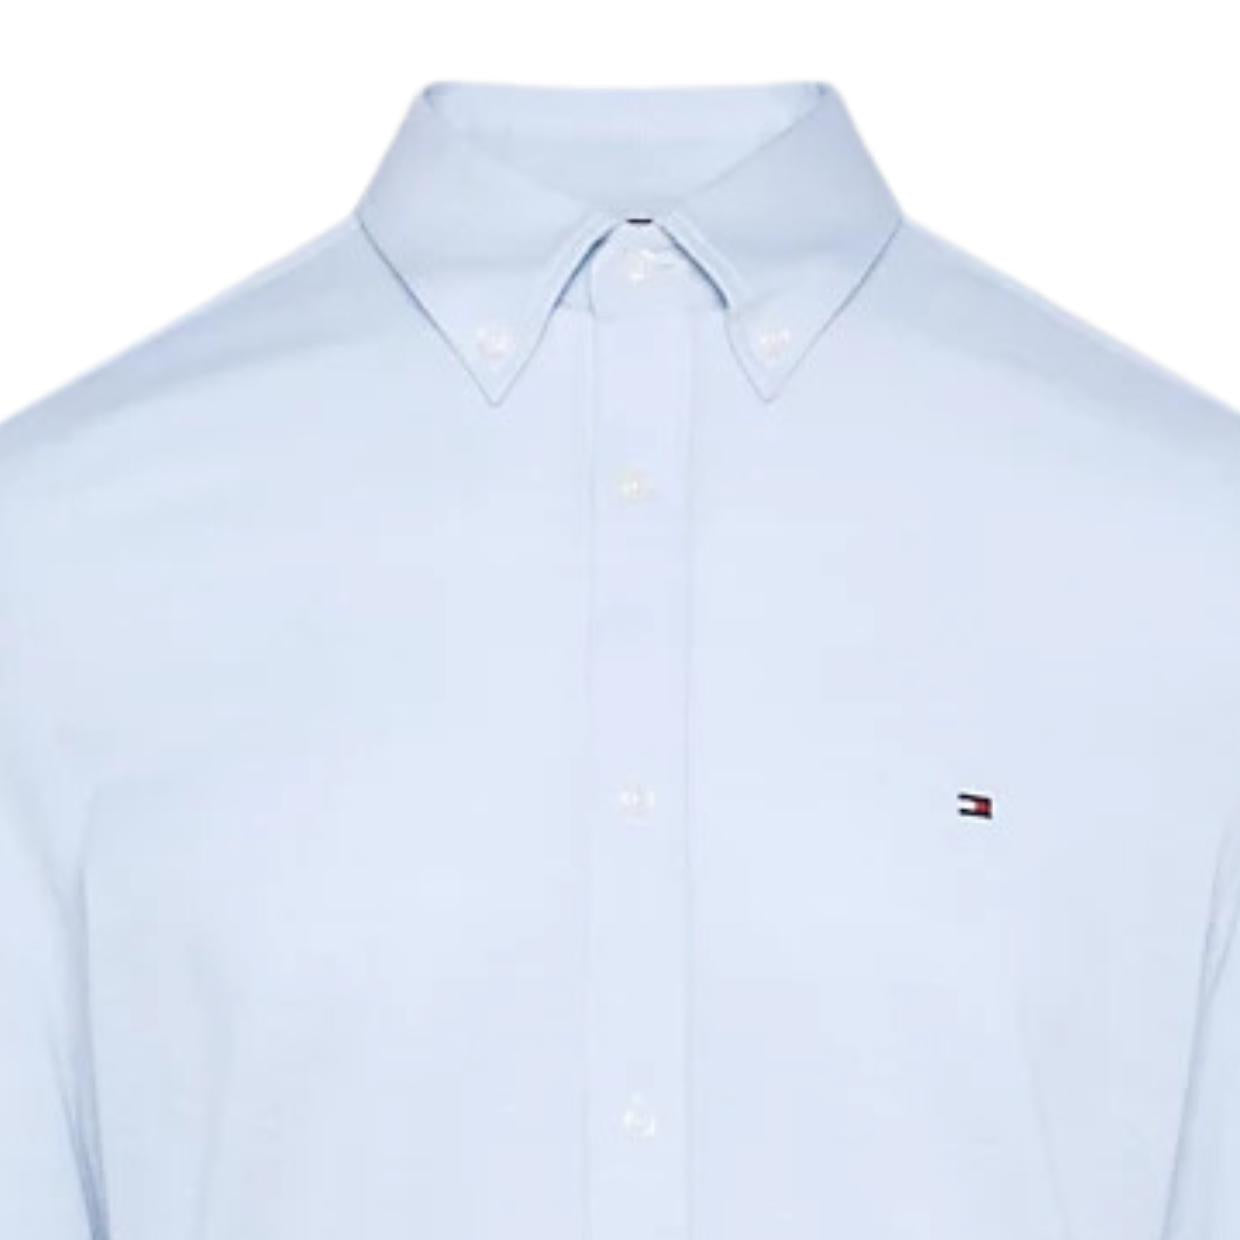 Tommy Hilfiger 1985 Knitted Sky Blue Shirt